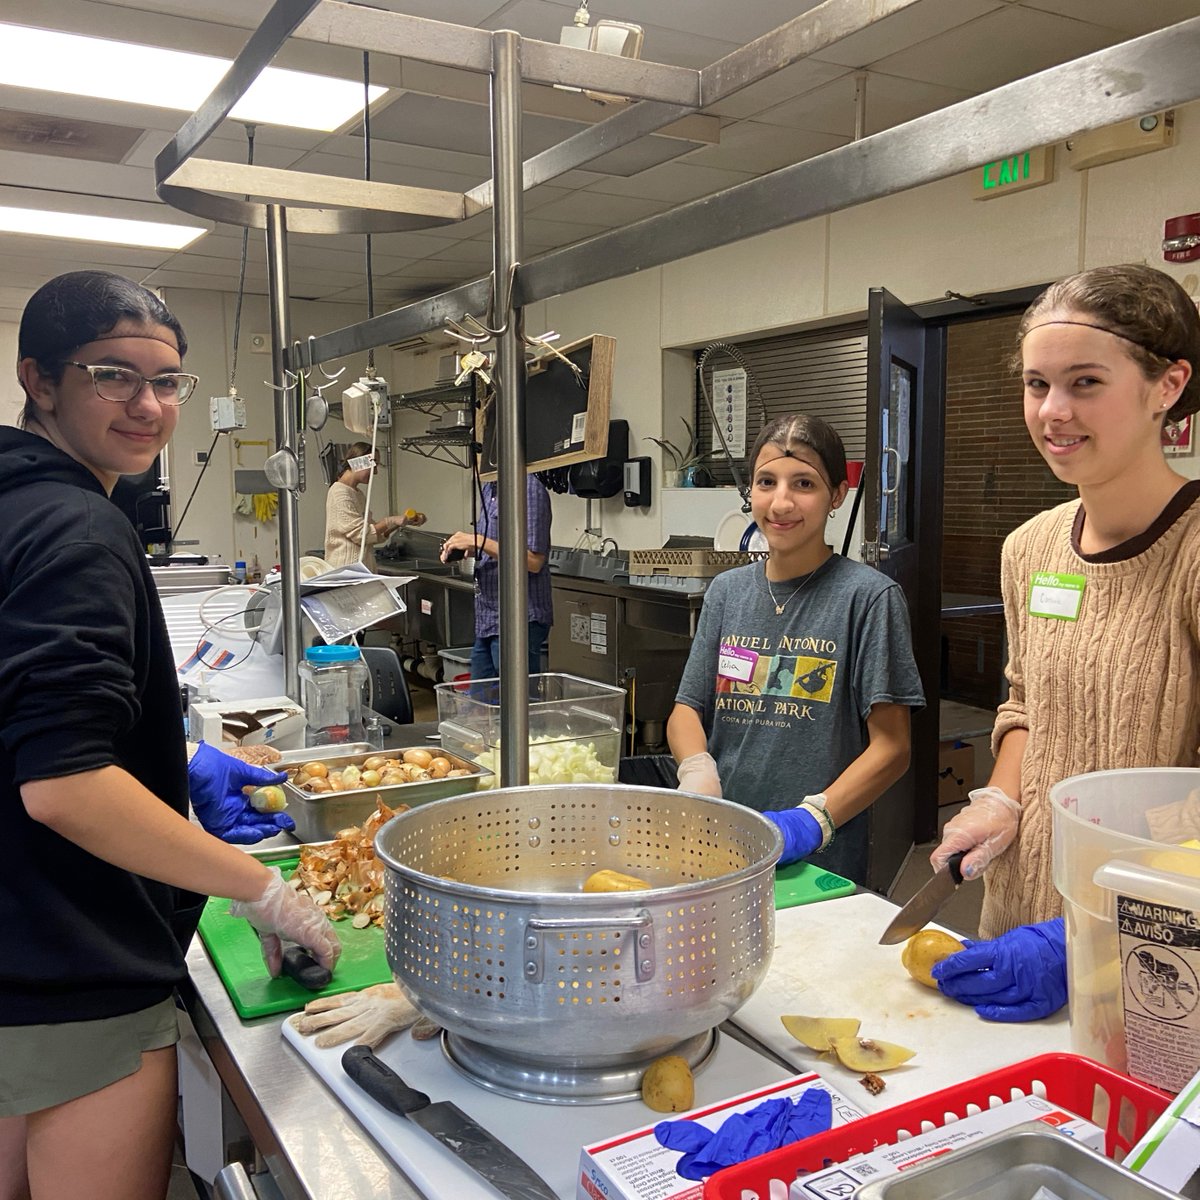 Thank you to the #StudentVolunteers from @friendsbalt for providing dinner service for the residents at The Station. Their enthusiasm, empathy, and tireless efforts remind us all of the power of giving back. 🤗